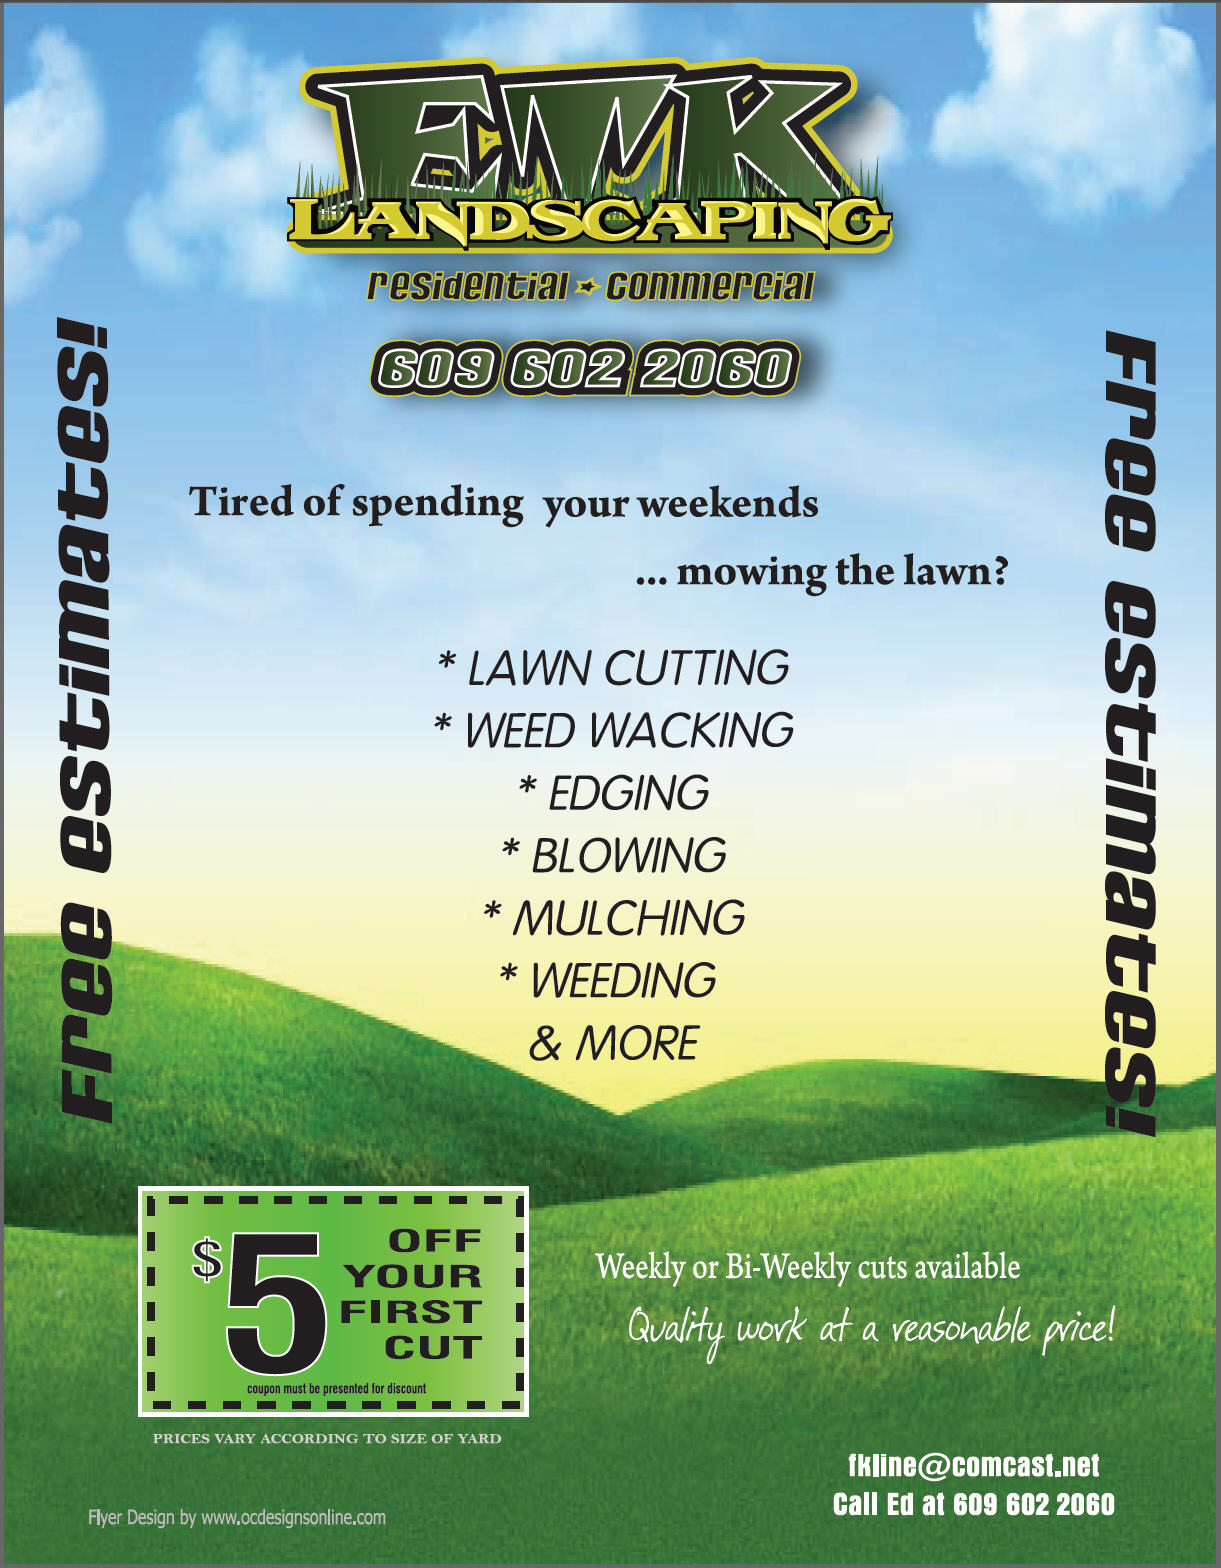 Landscaping Company Flyers